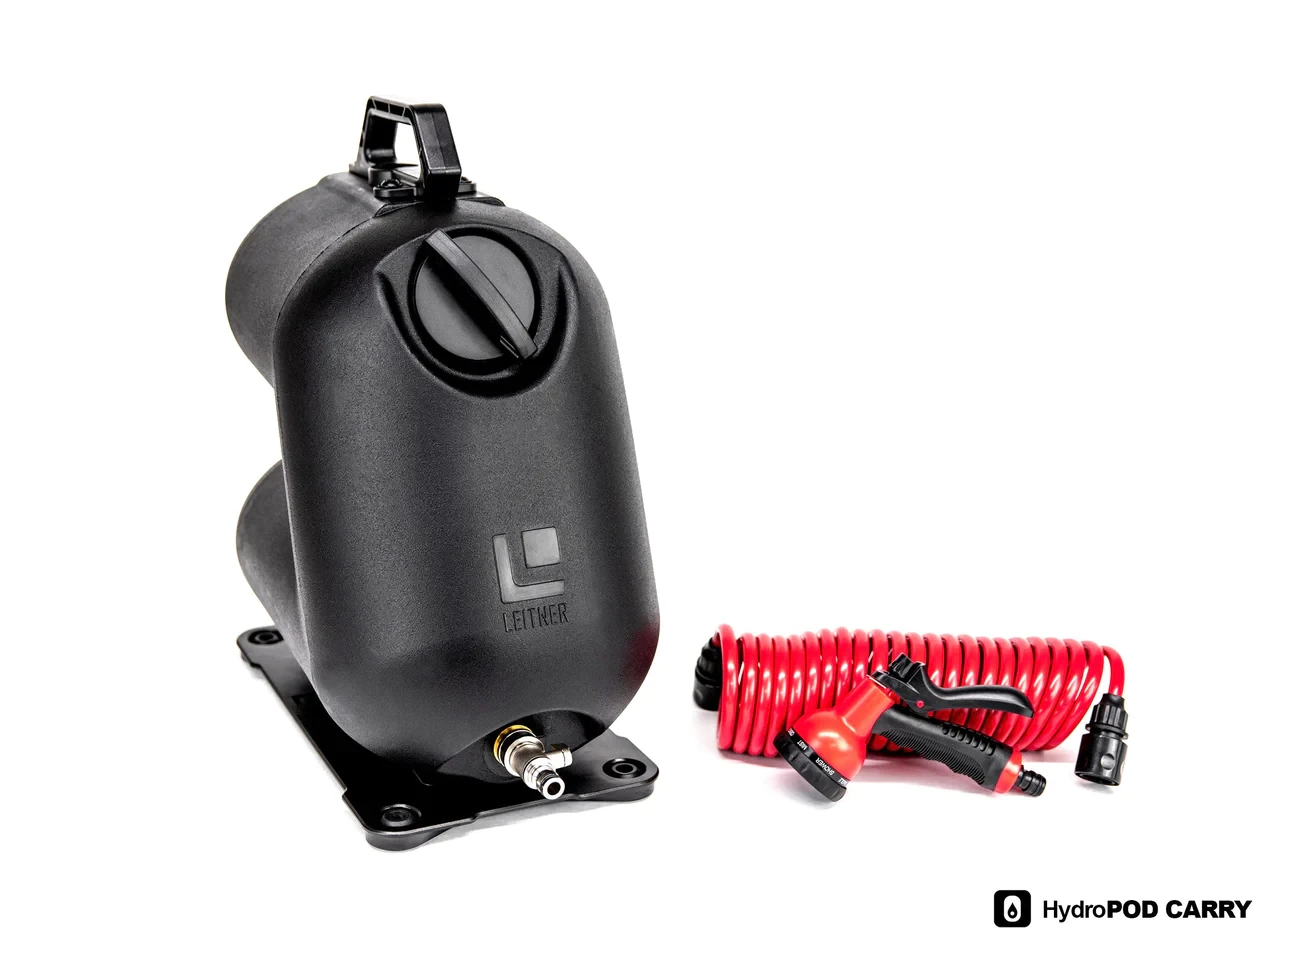 Leitner HydroPOD Carry Portable Shower Kit